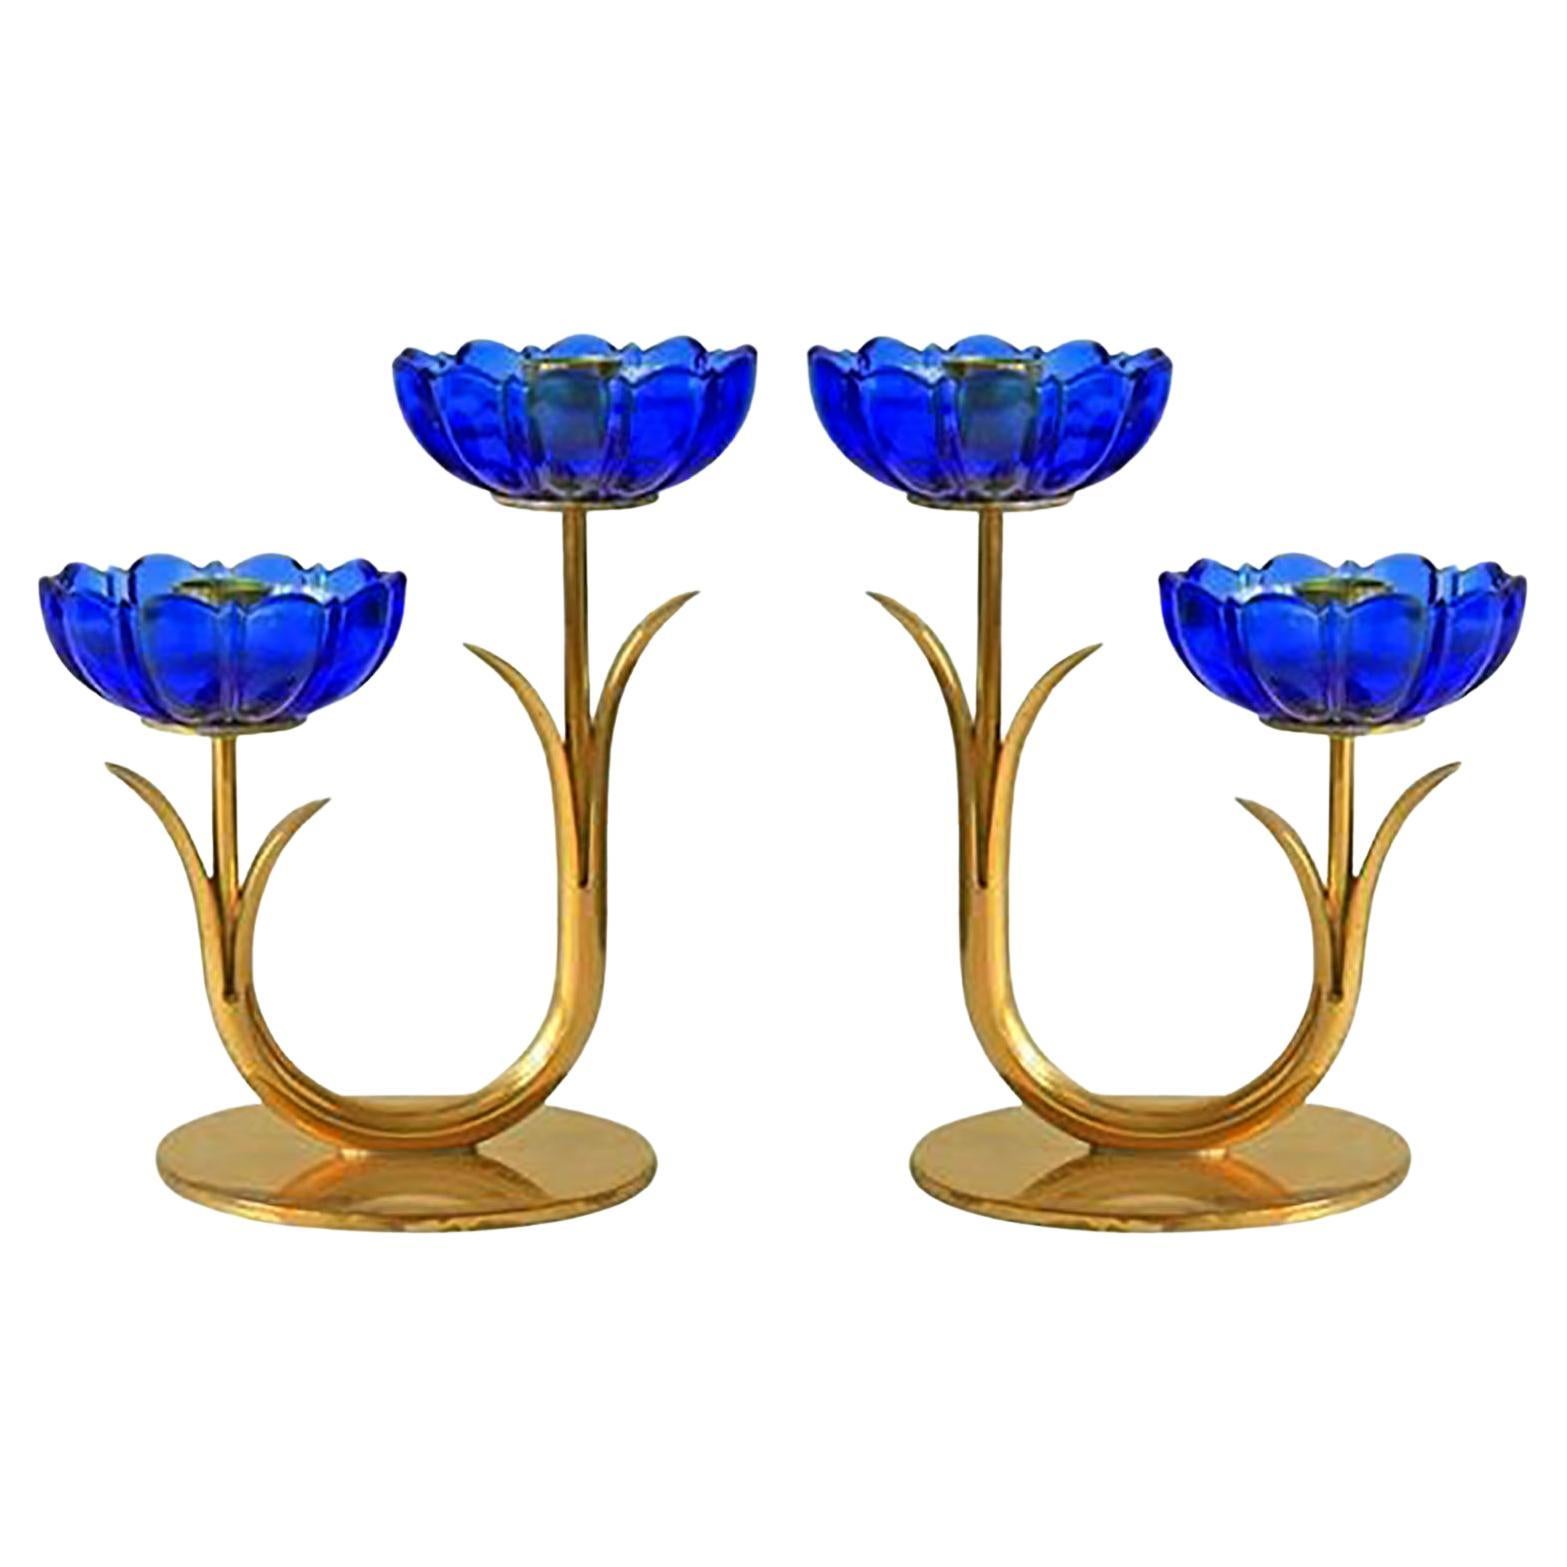 Gunnar Ander for Ystad Metall, Pair of Brass and Blue Glass Candlestick